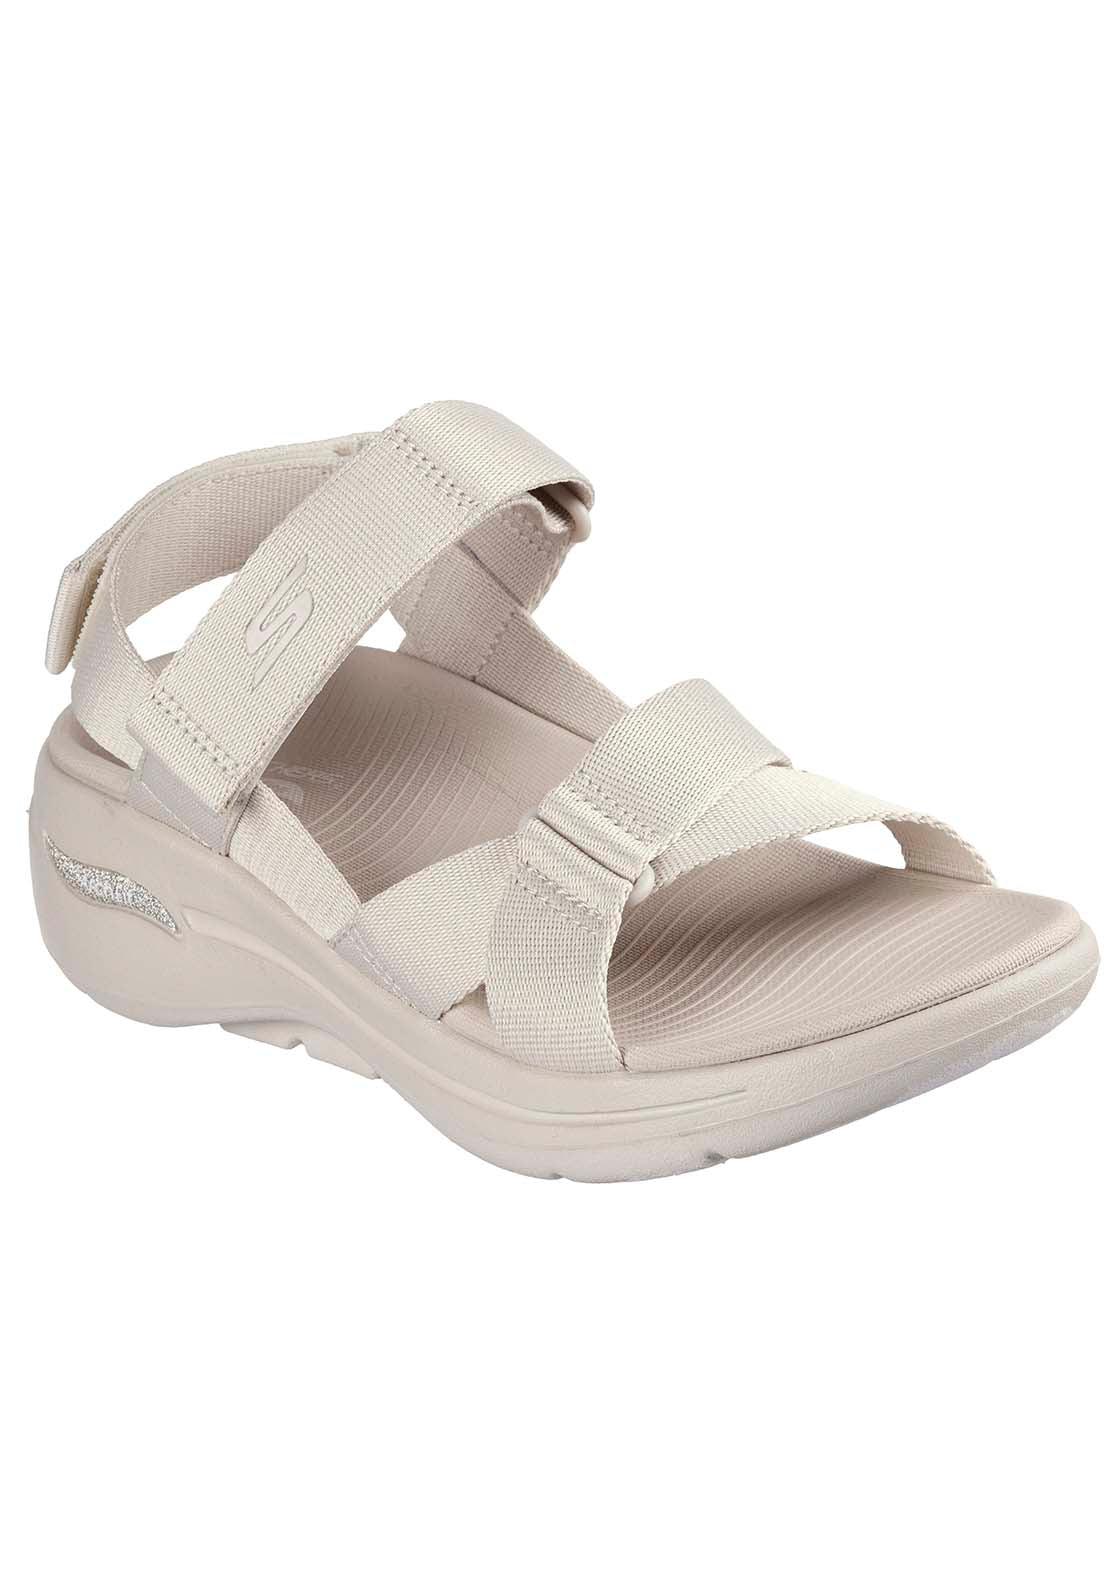 Skechers Go Walk Arch Fit Sandal 1 Shaws Department Stores